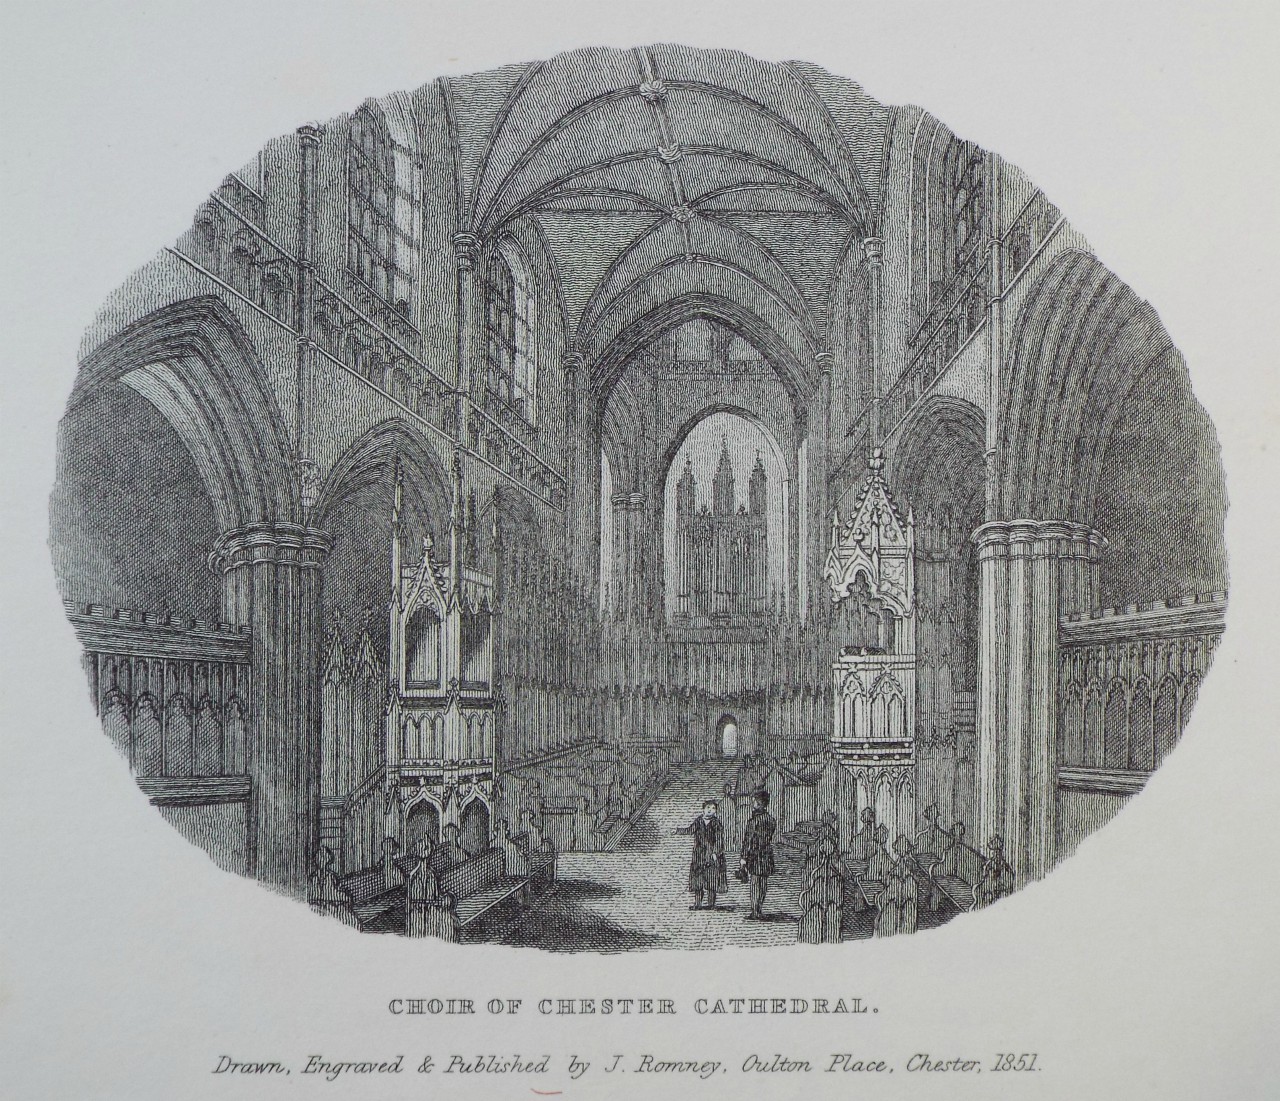 Print - Choir of Chester Cathedral. - Romney